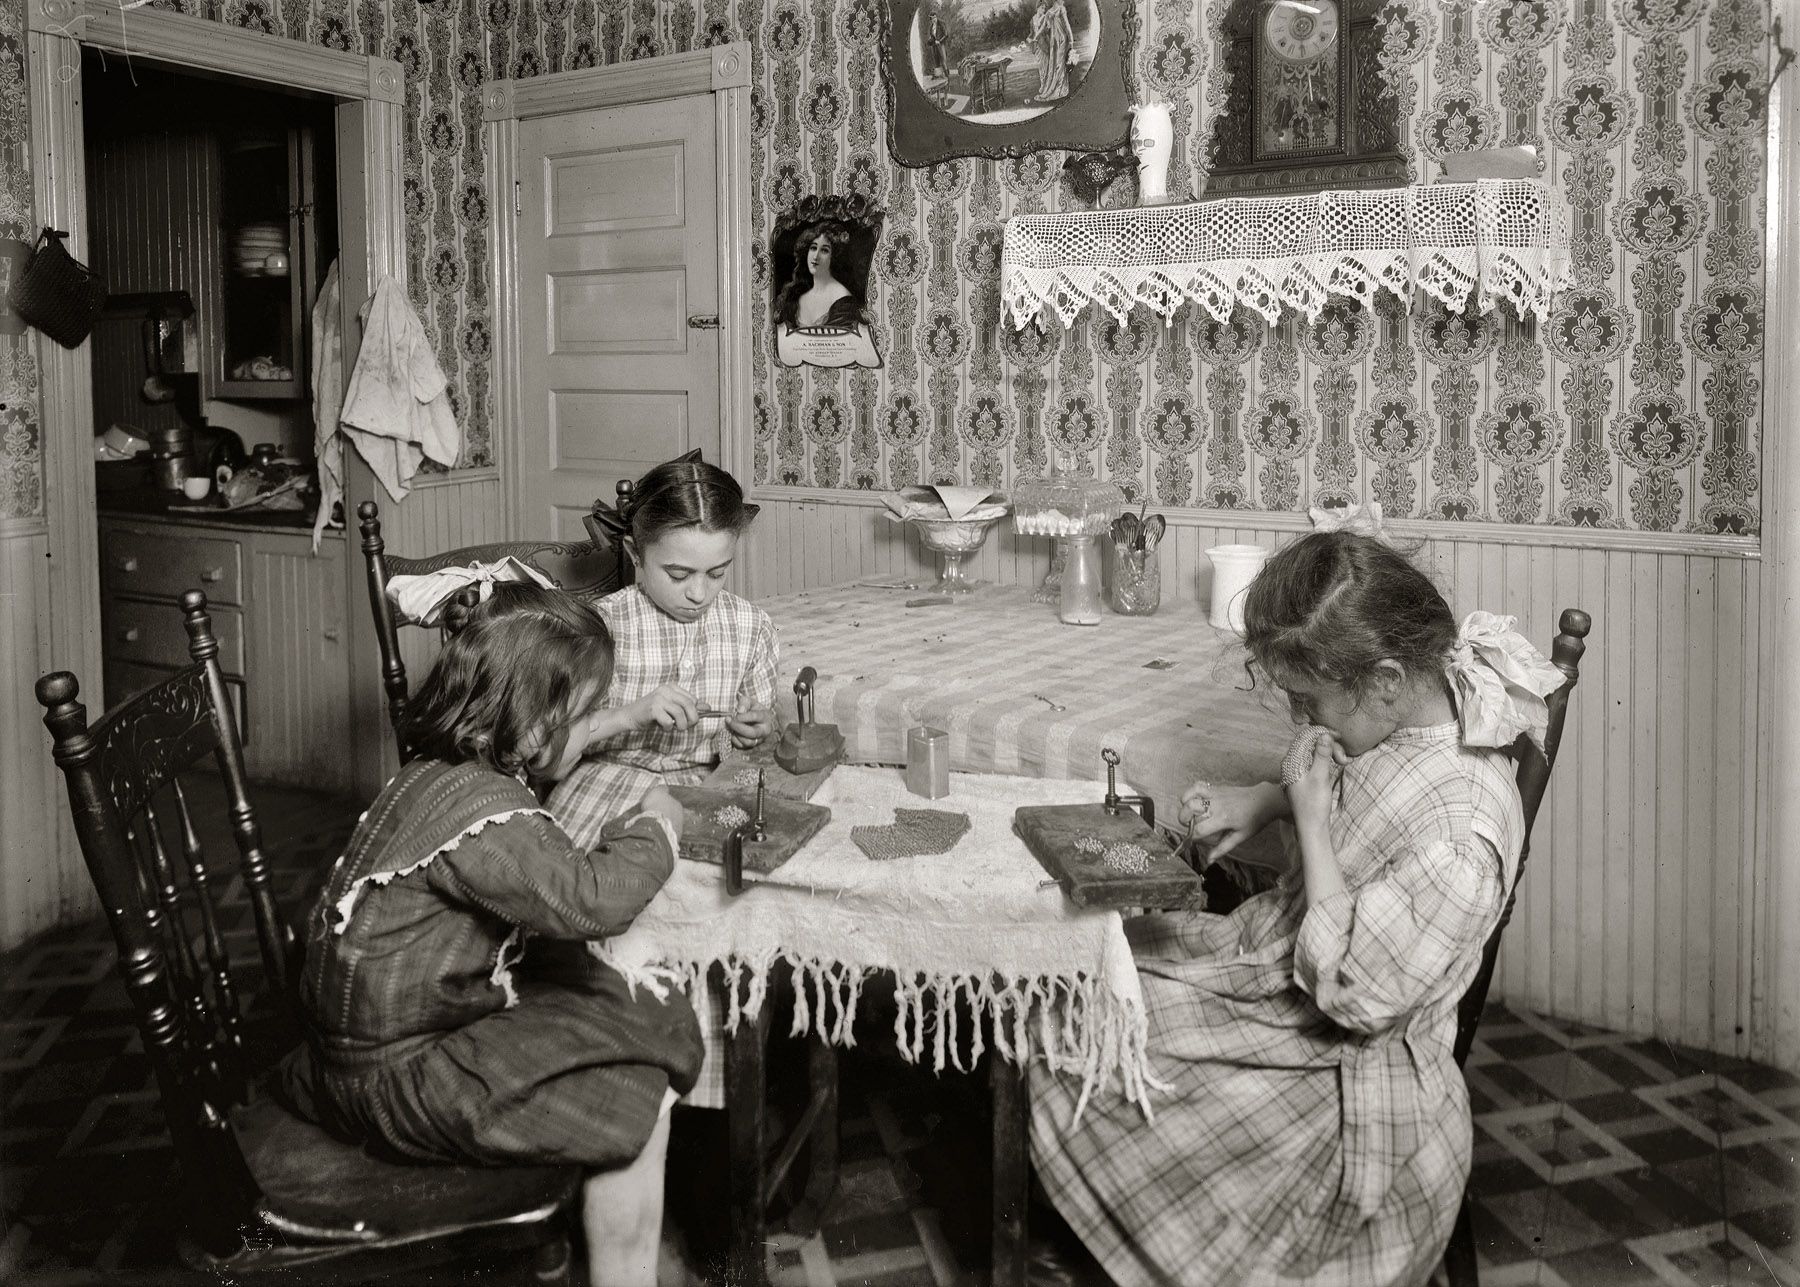 November 1912. Providence, Rhode Island. "Girls 6, 9 and 11 years old, working on chain-bags in home of Mrs. Antonio Caruso, 132 Knight Street." Imaged from a glass negative taken by Lewis Wickes Hine. View full size.